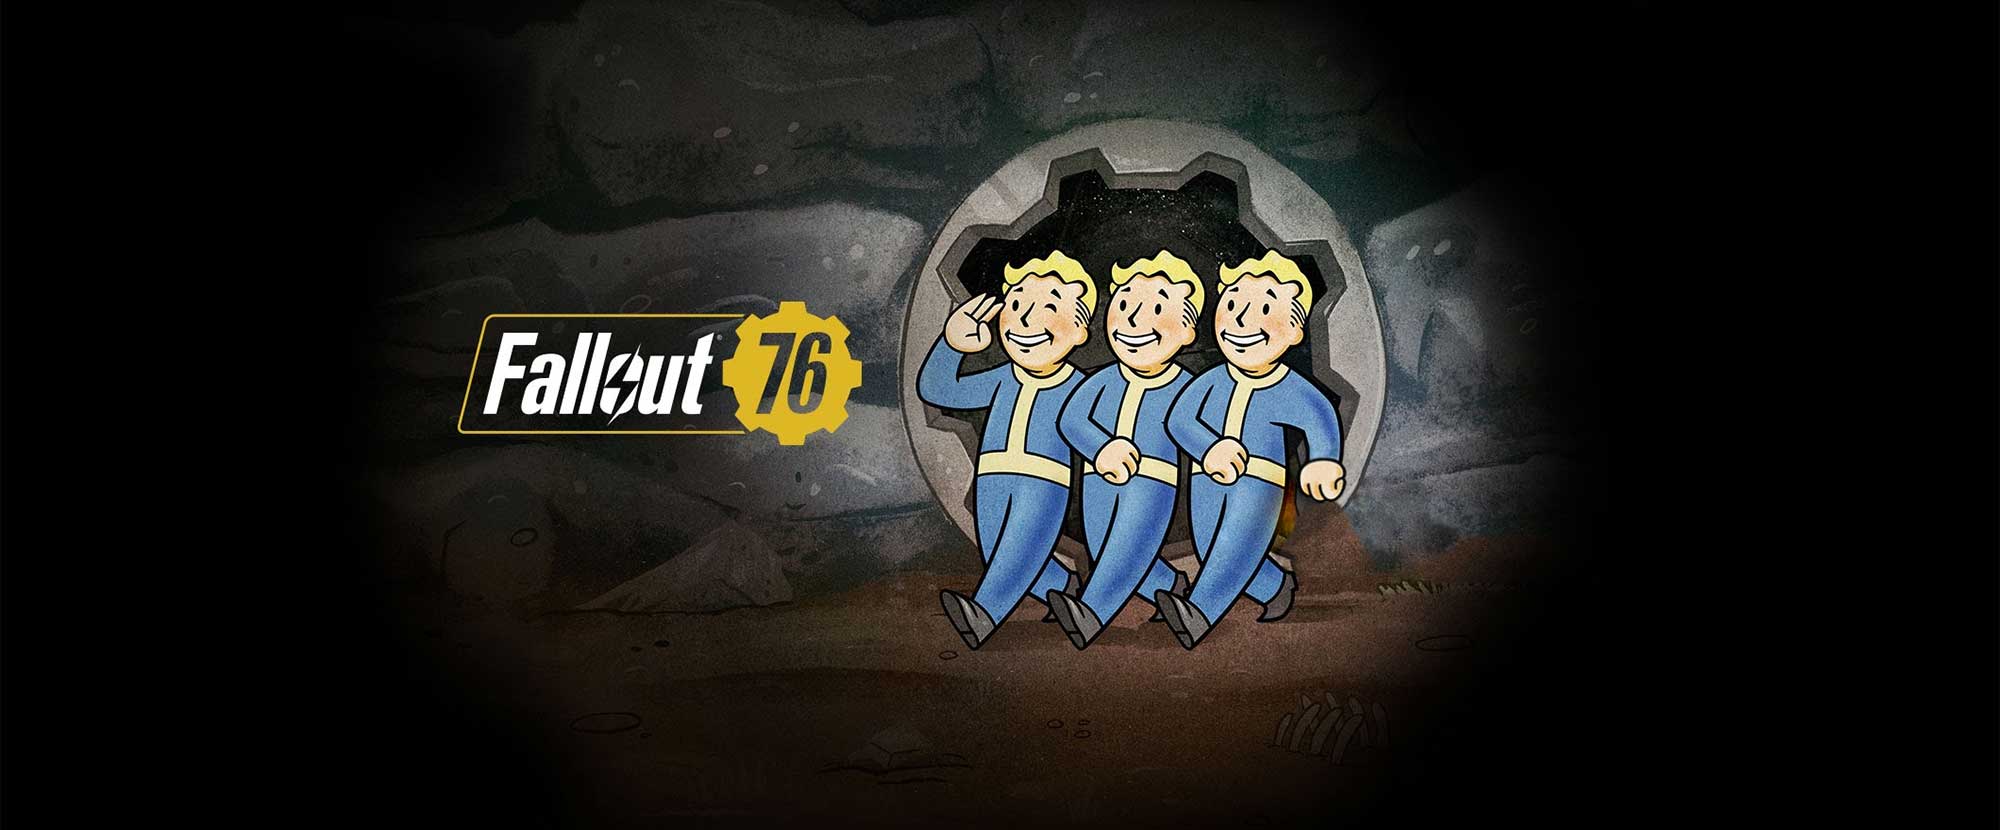 Read this before playing Fallout 76: A jump start beginner's guide